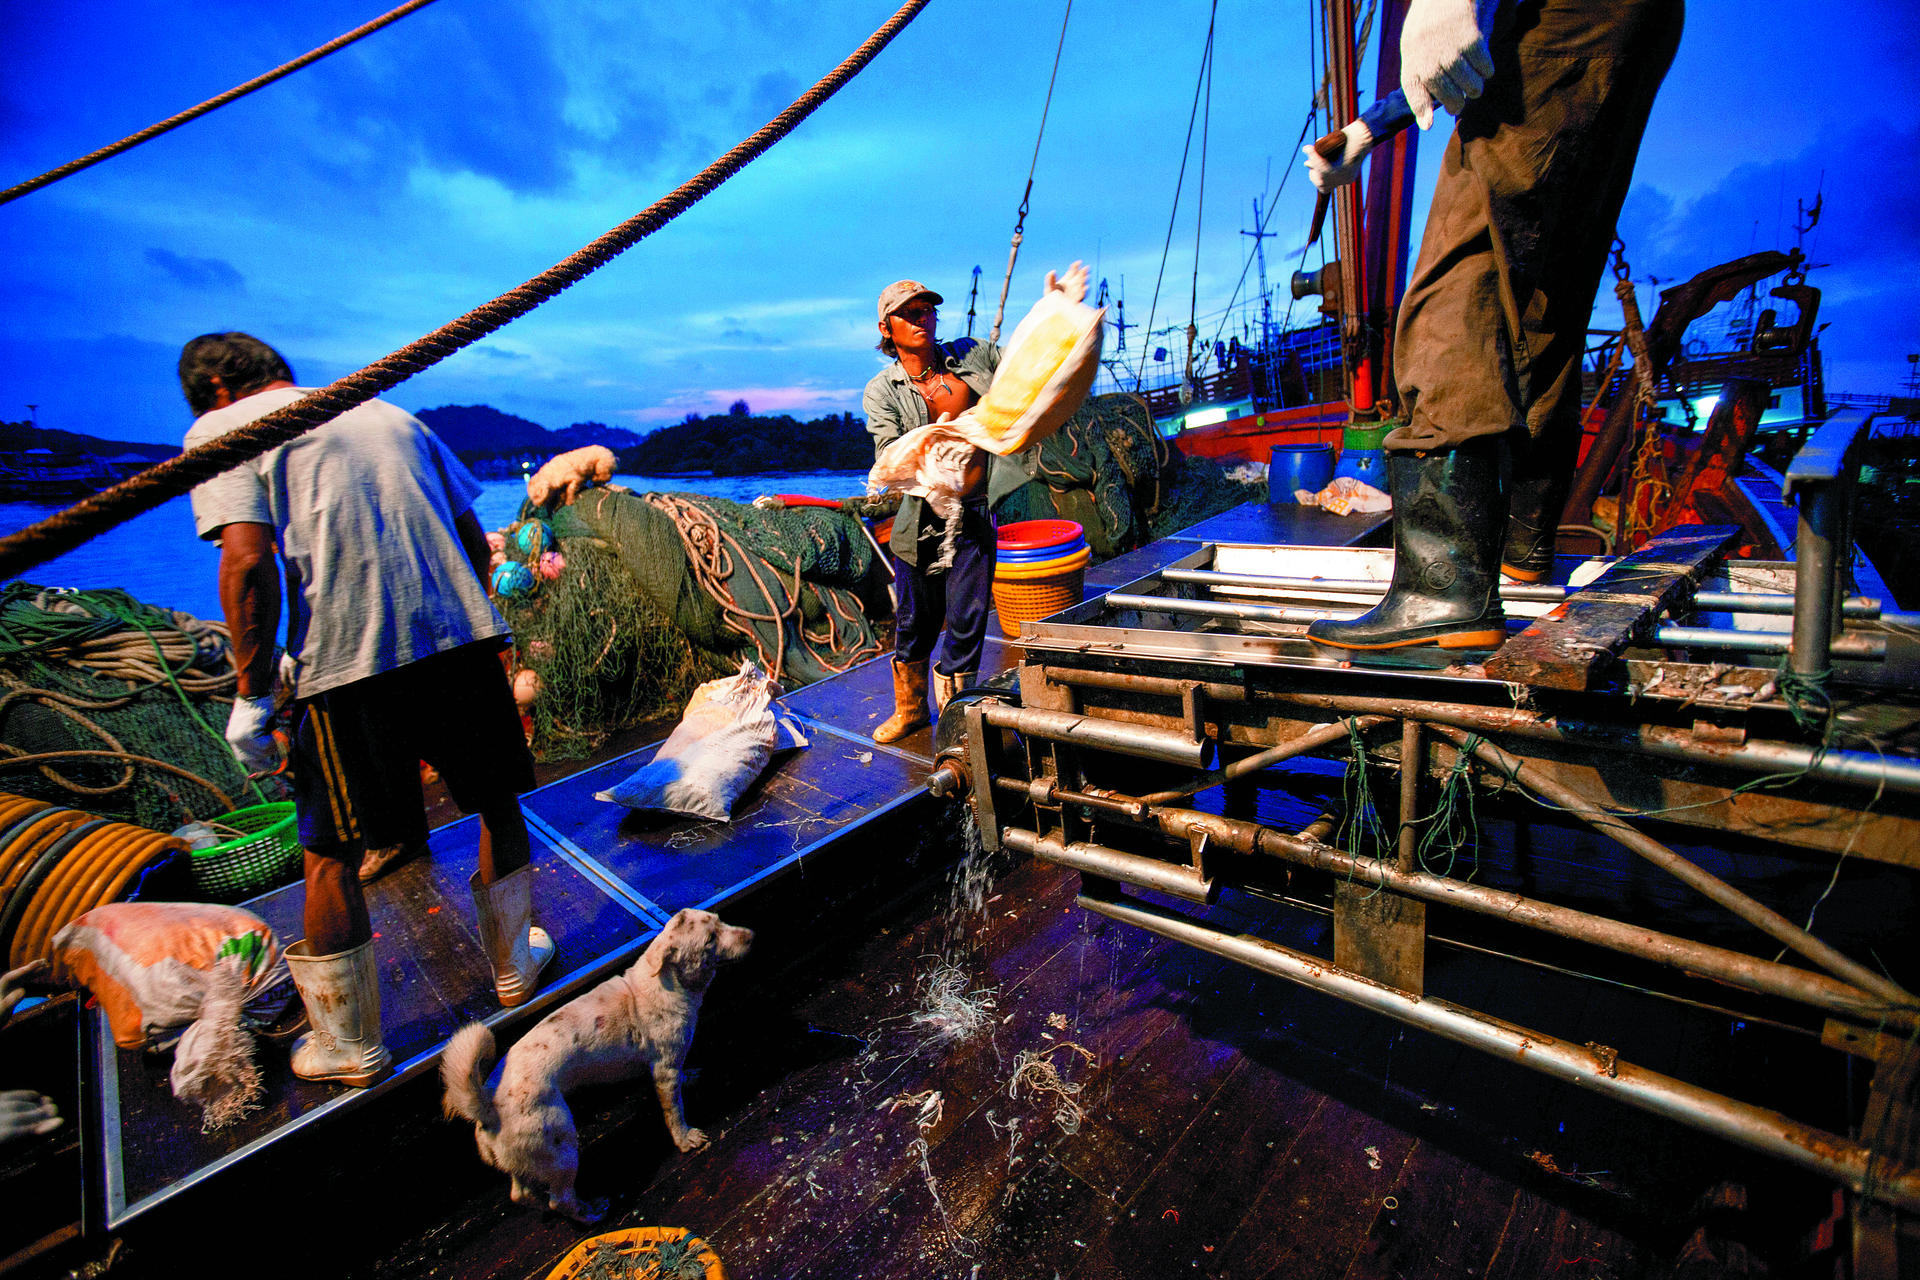 Dawn sees trawler fishermen in Phuket sort the previous night's catch.